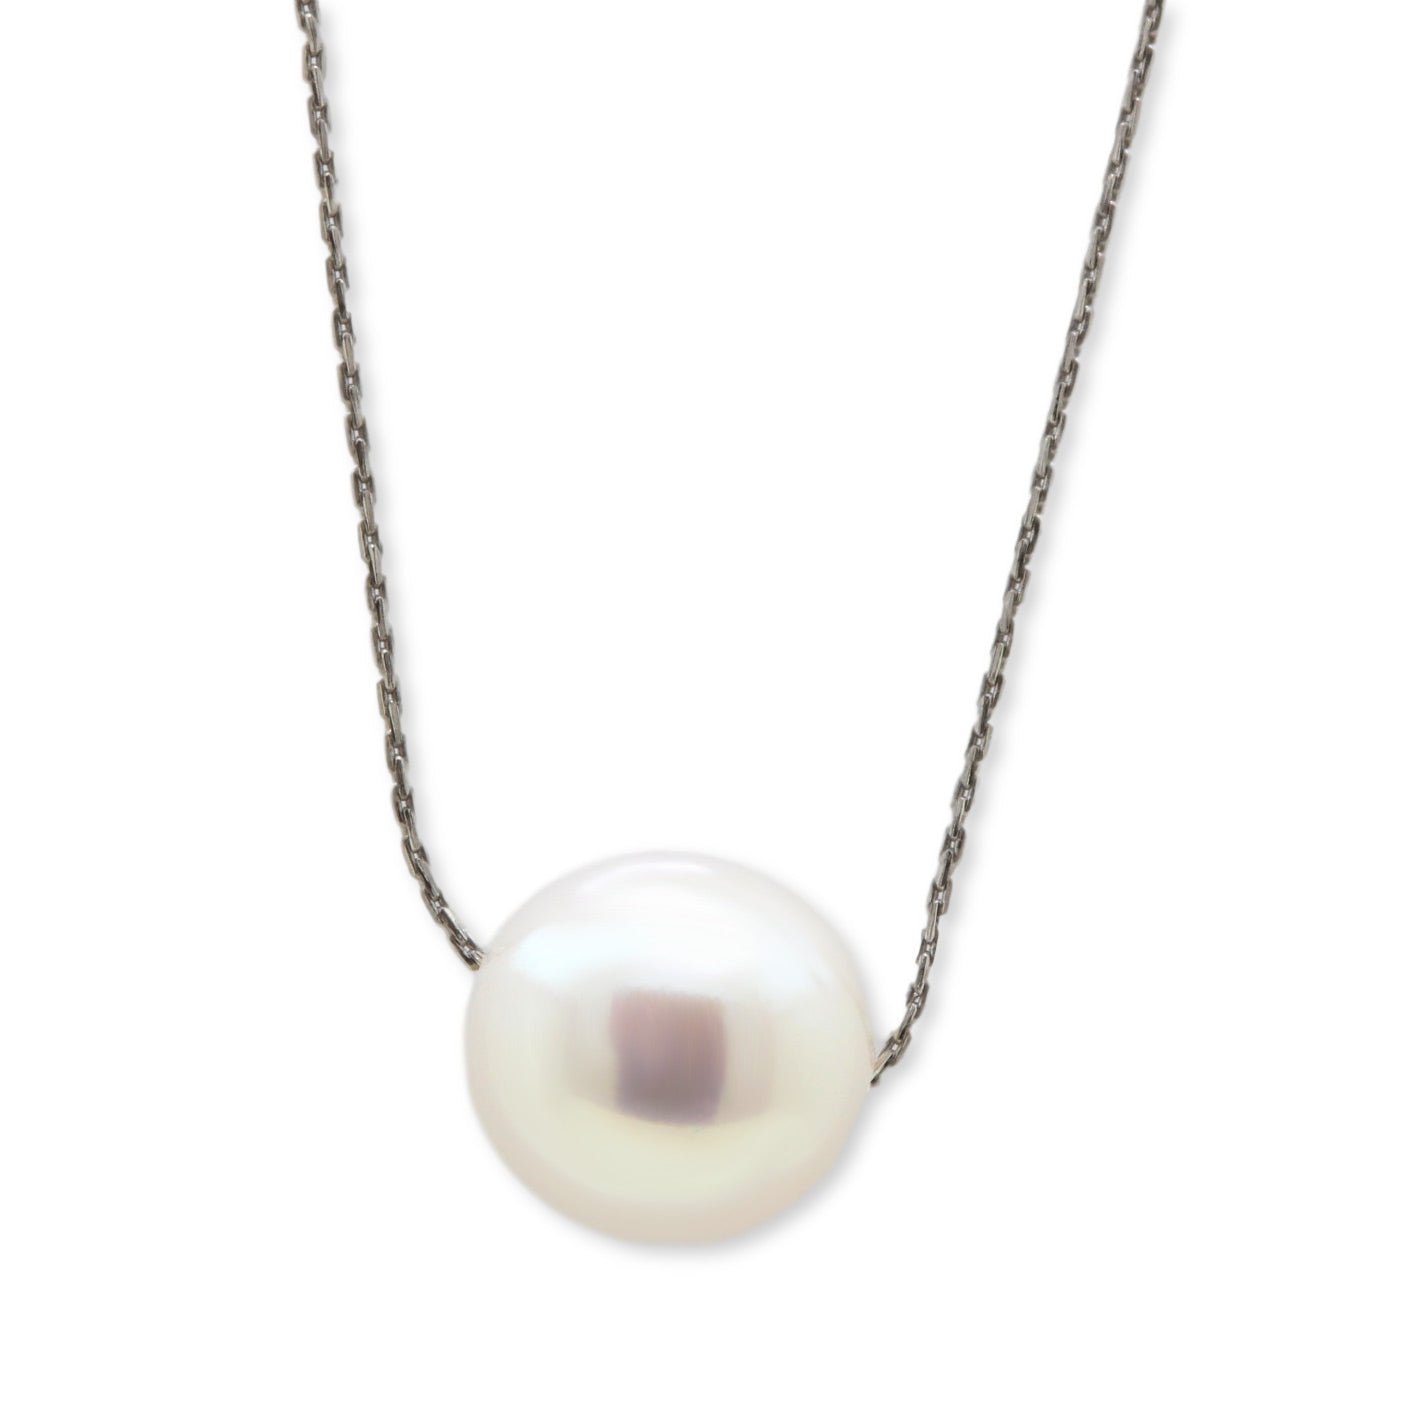 18ct white gold 8.0mm freshwater pearl slider necklace.